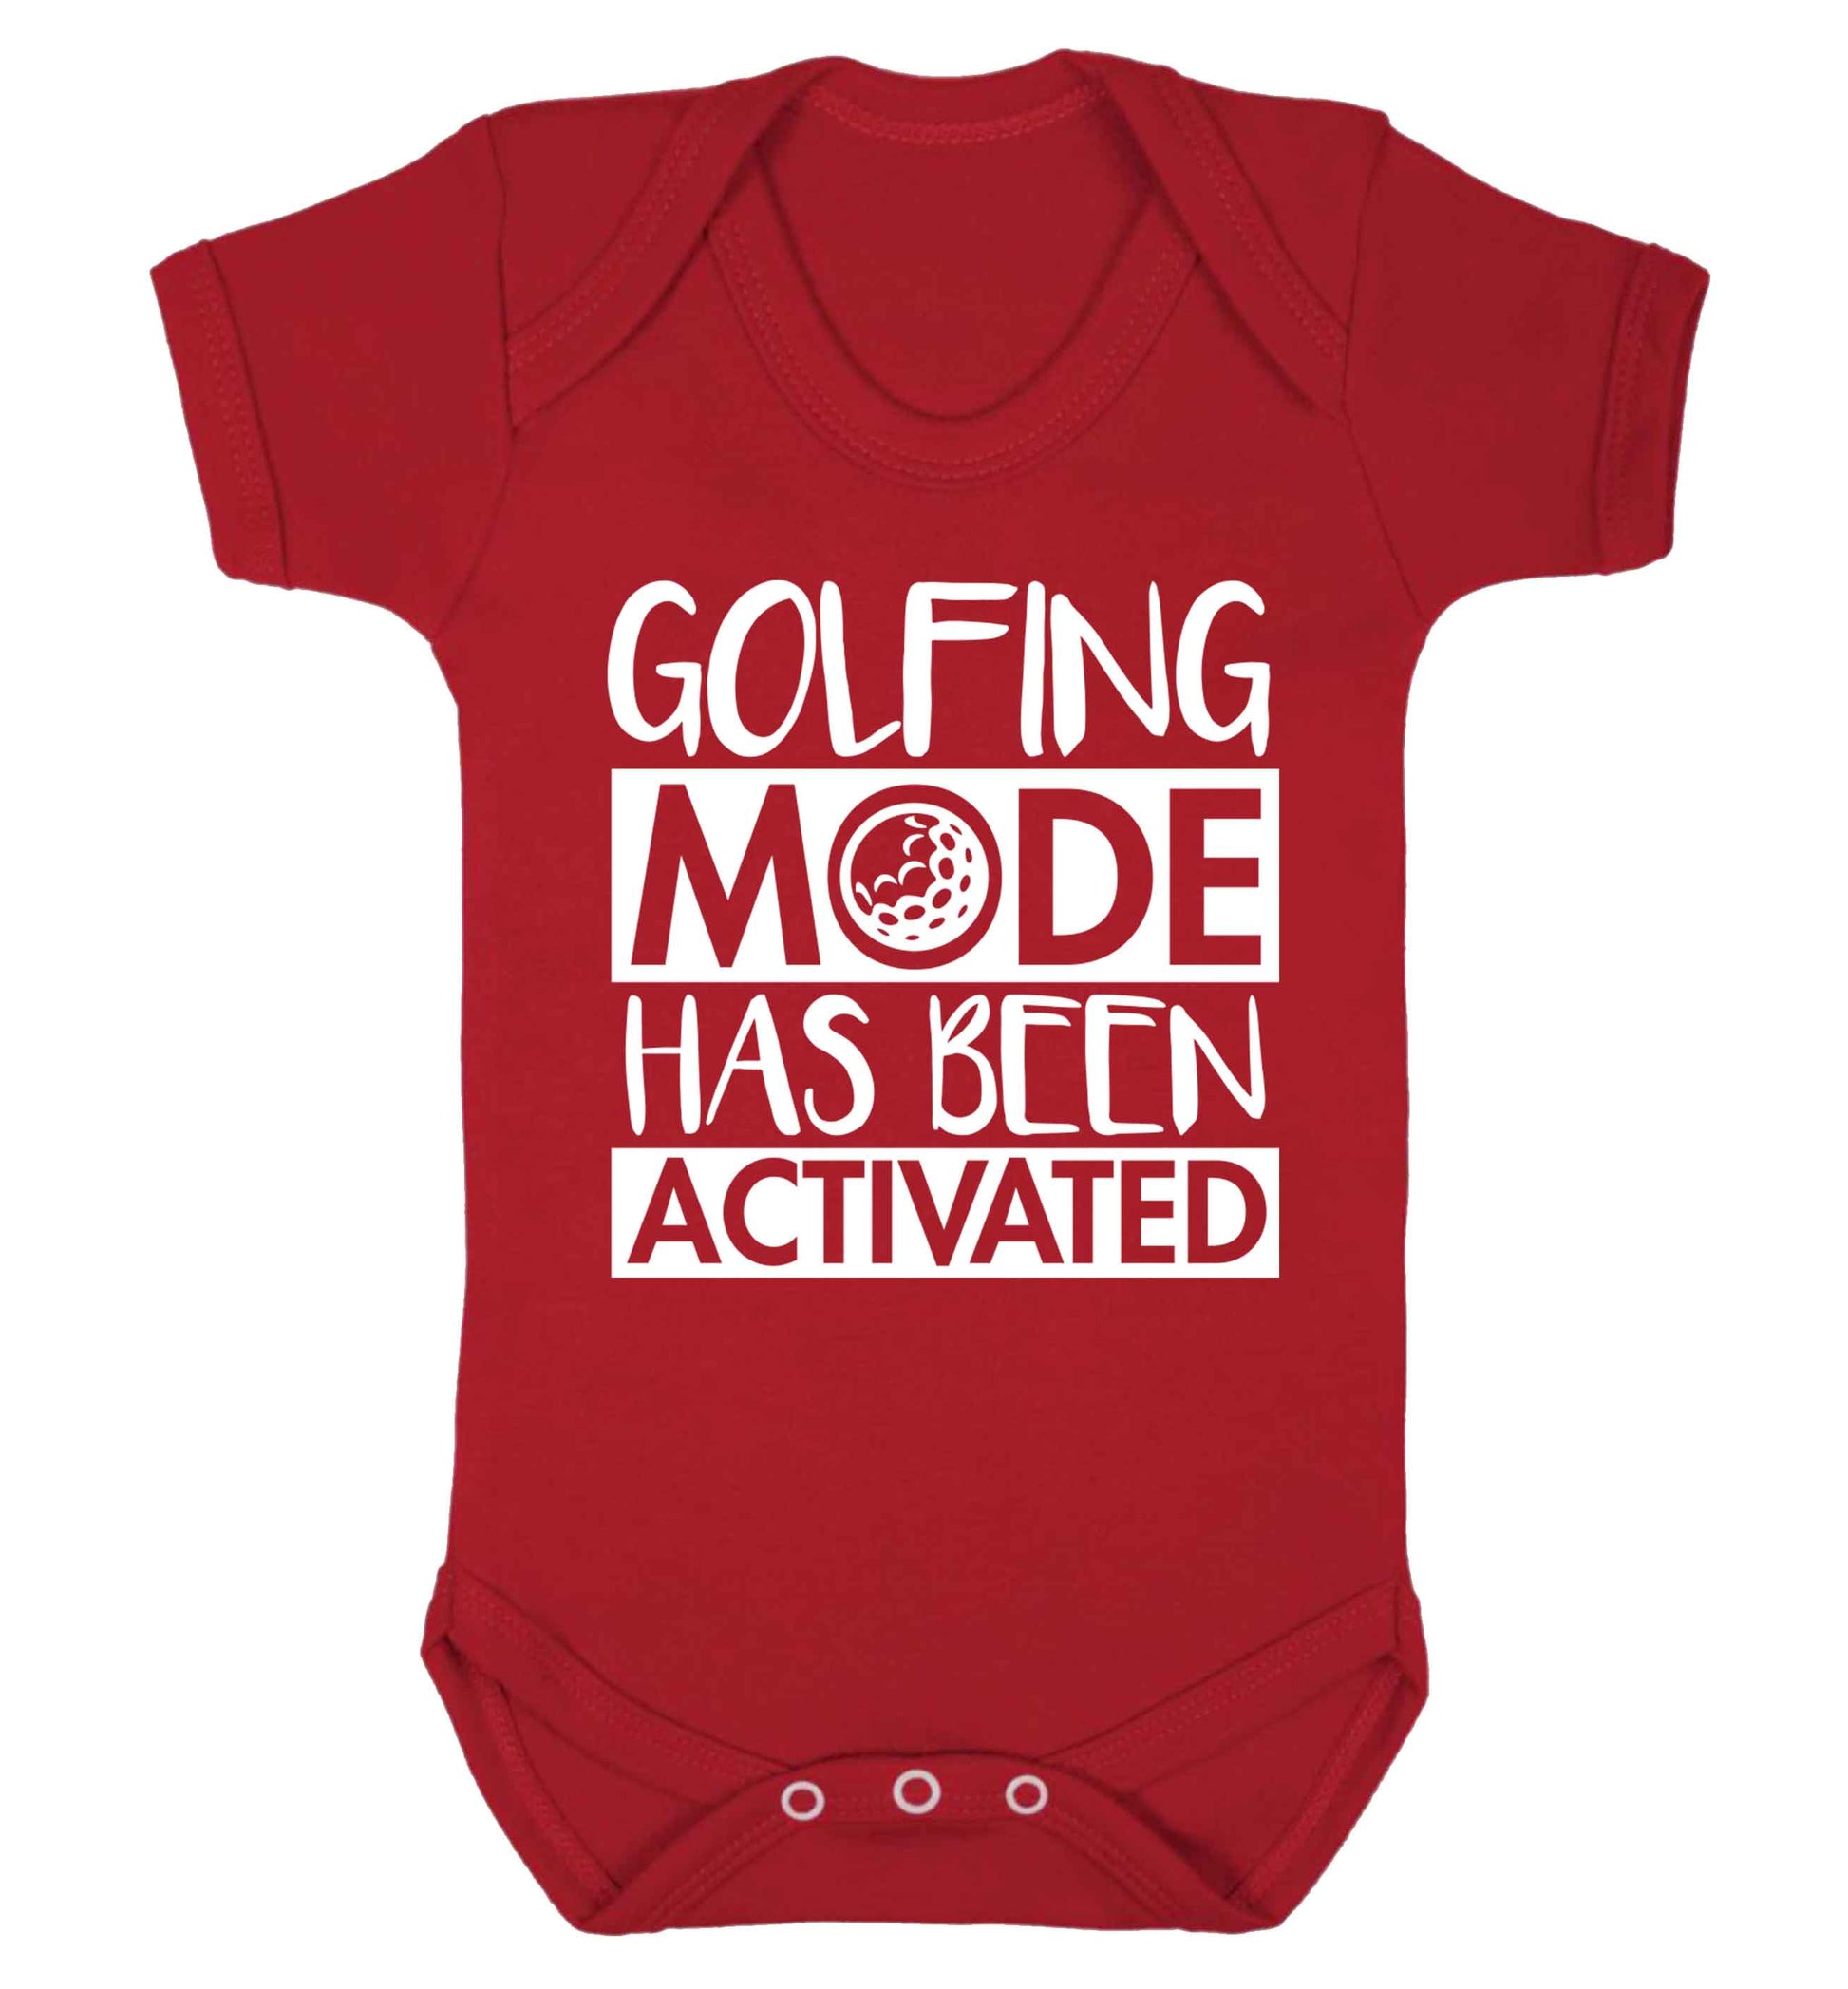 Golfing mode has been activated Baby Vest red 18-24 months